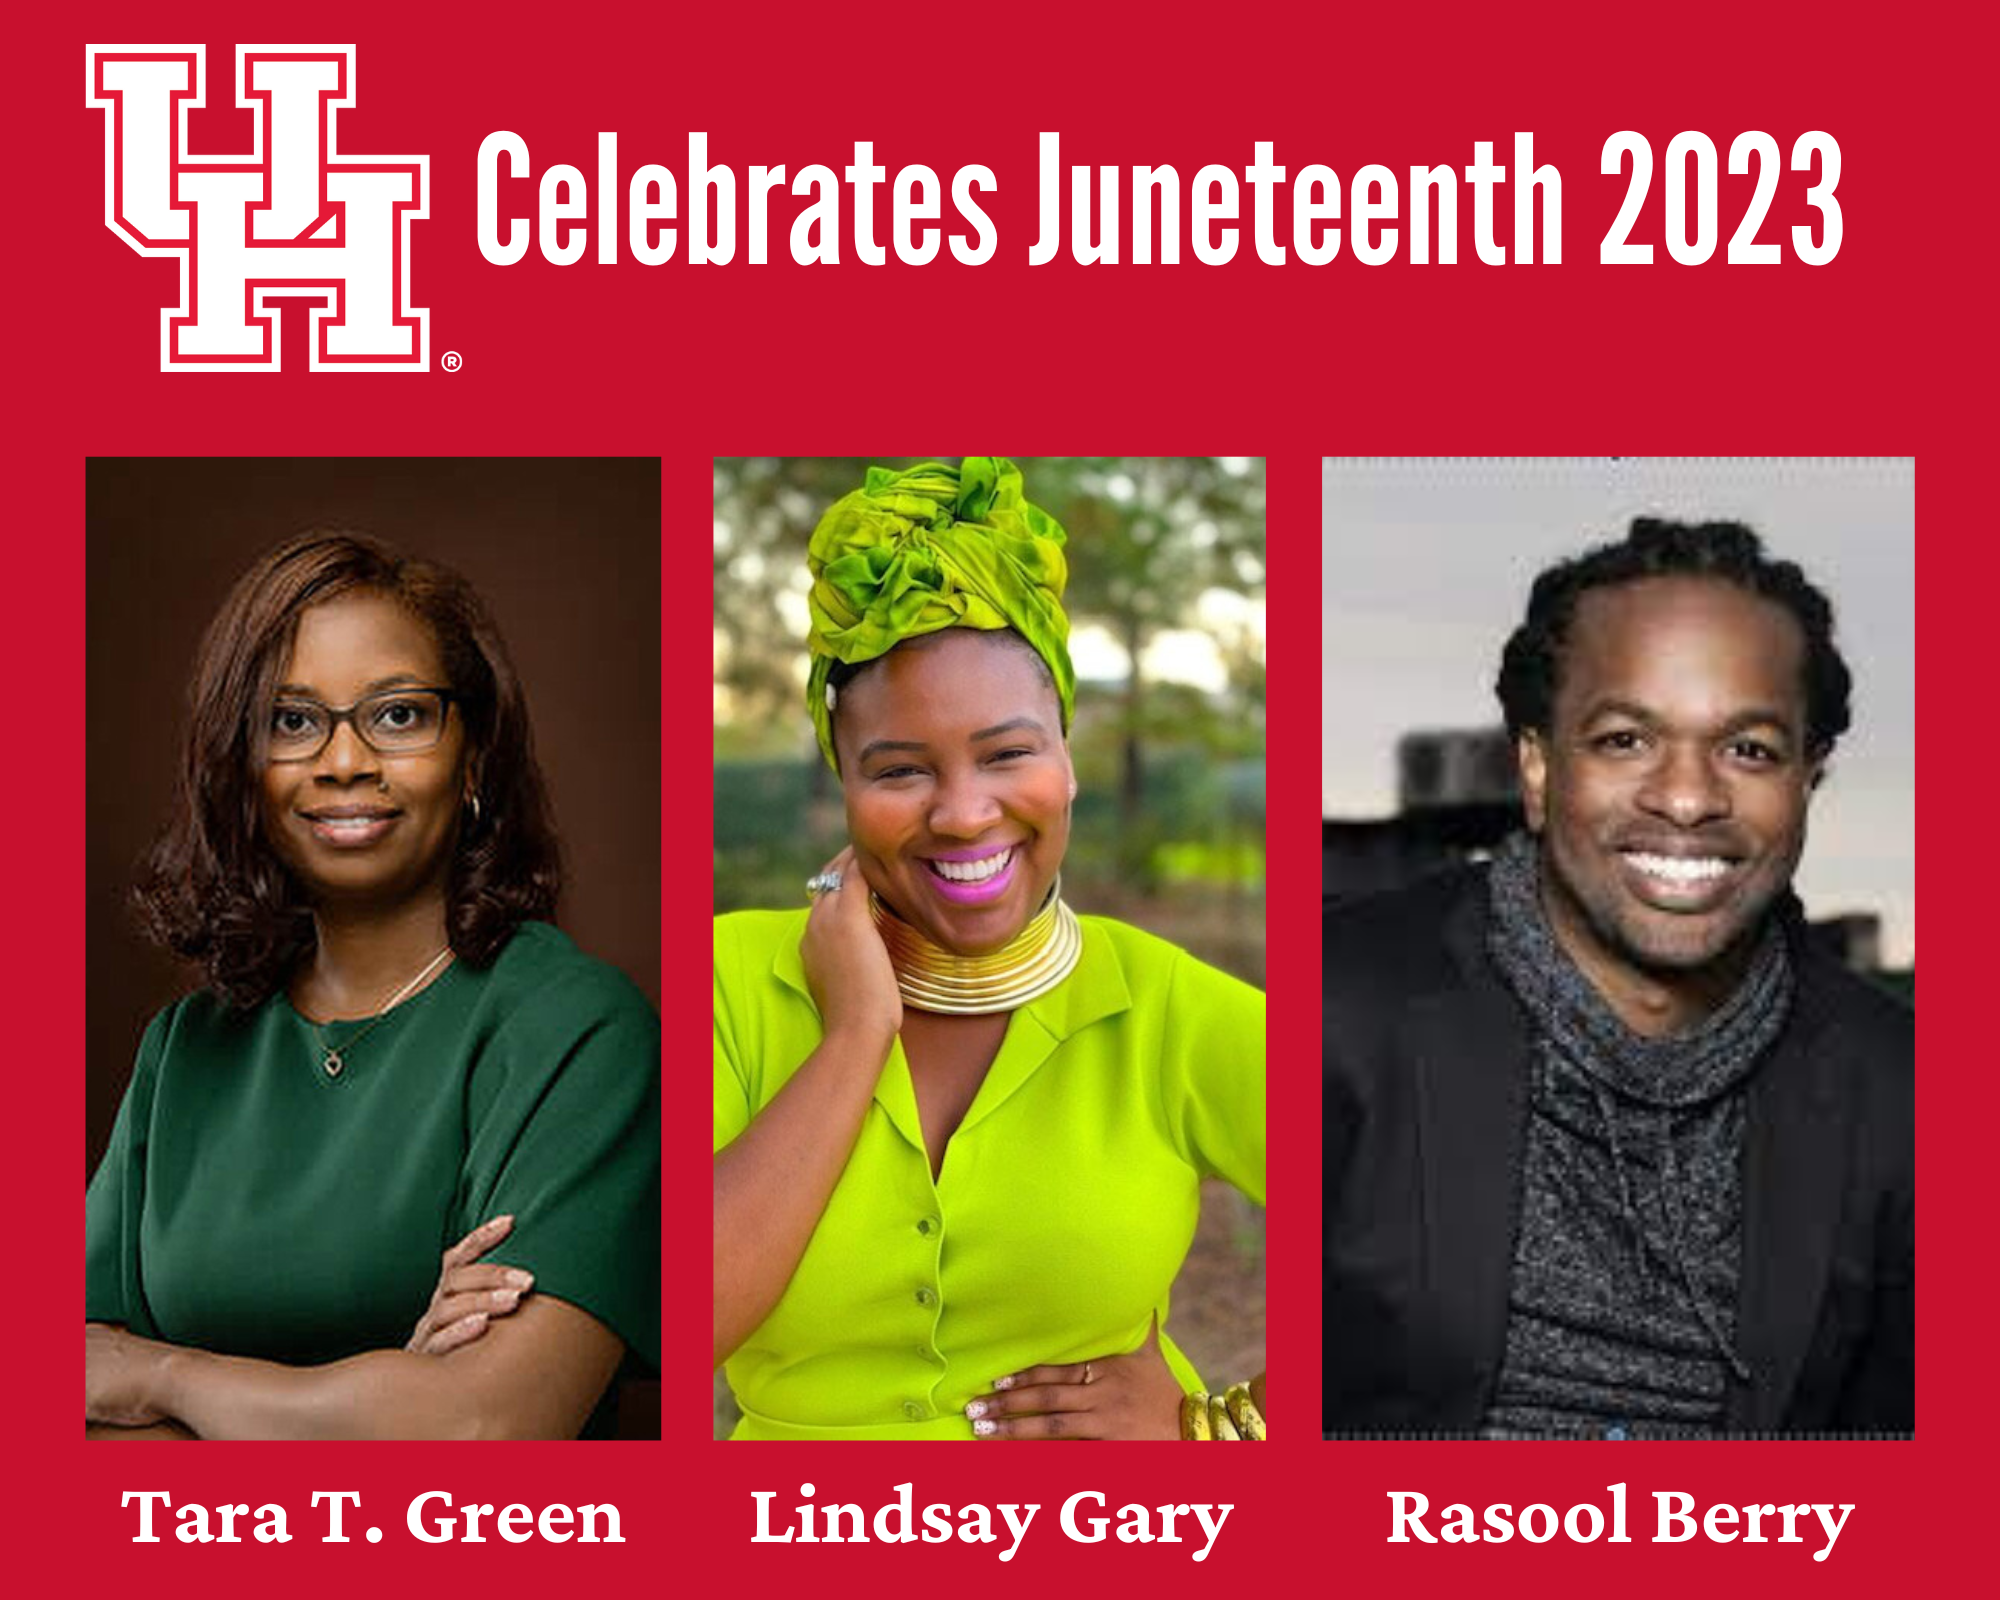 UH celebrates Juneteenth with several campus and community events